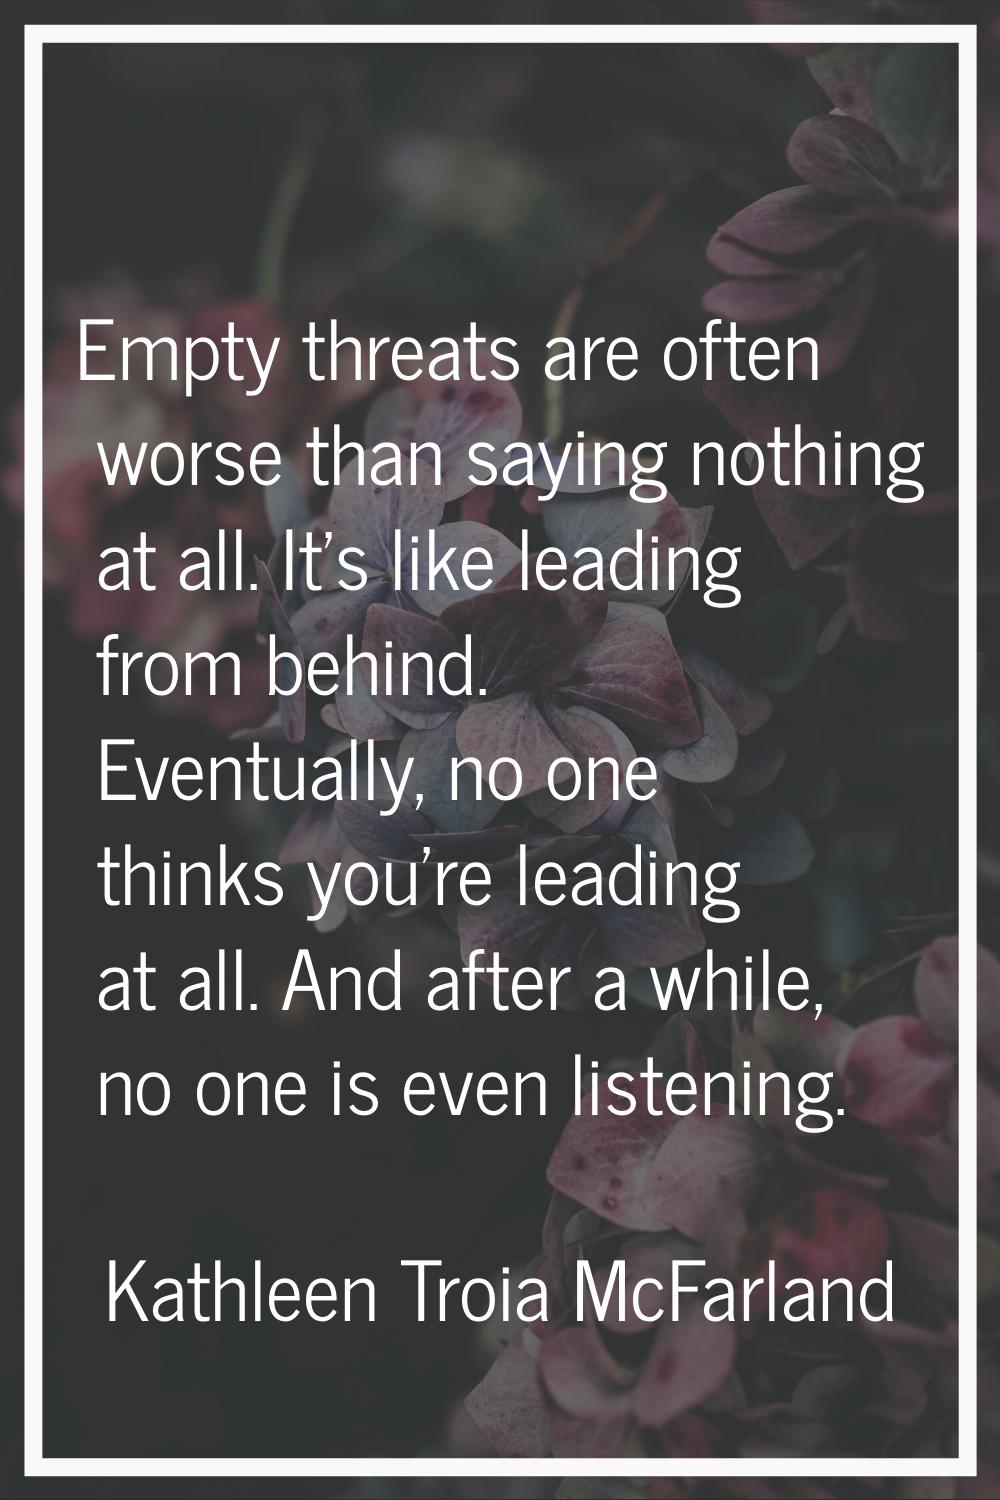 Empty threats are often worse than saying nothing at all. It's like leading from behind. Eventually